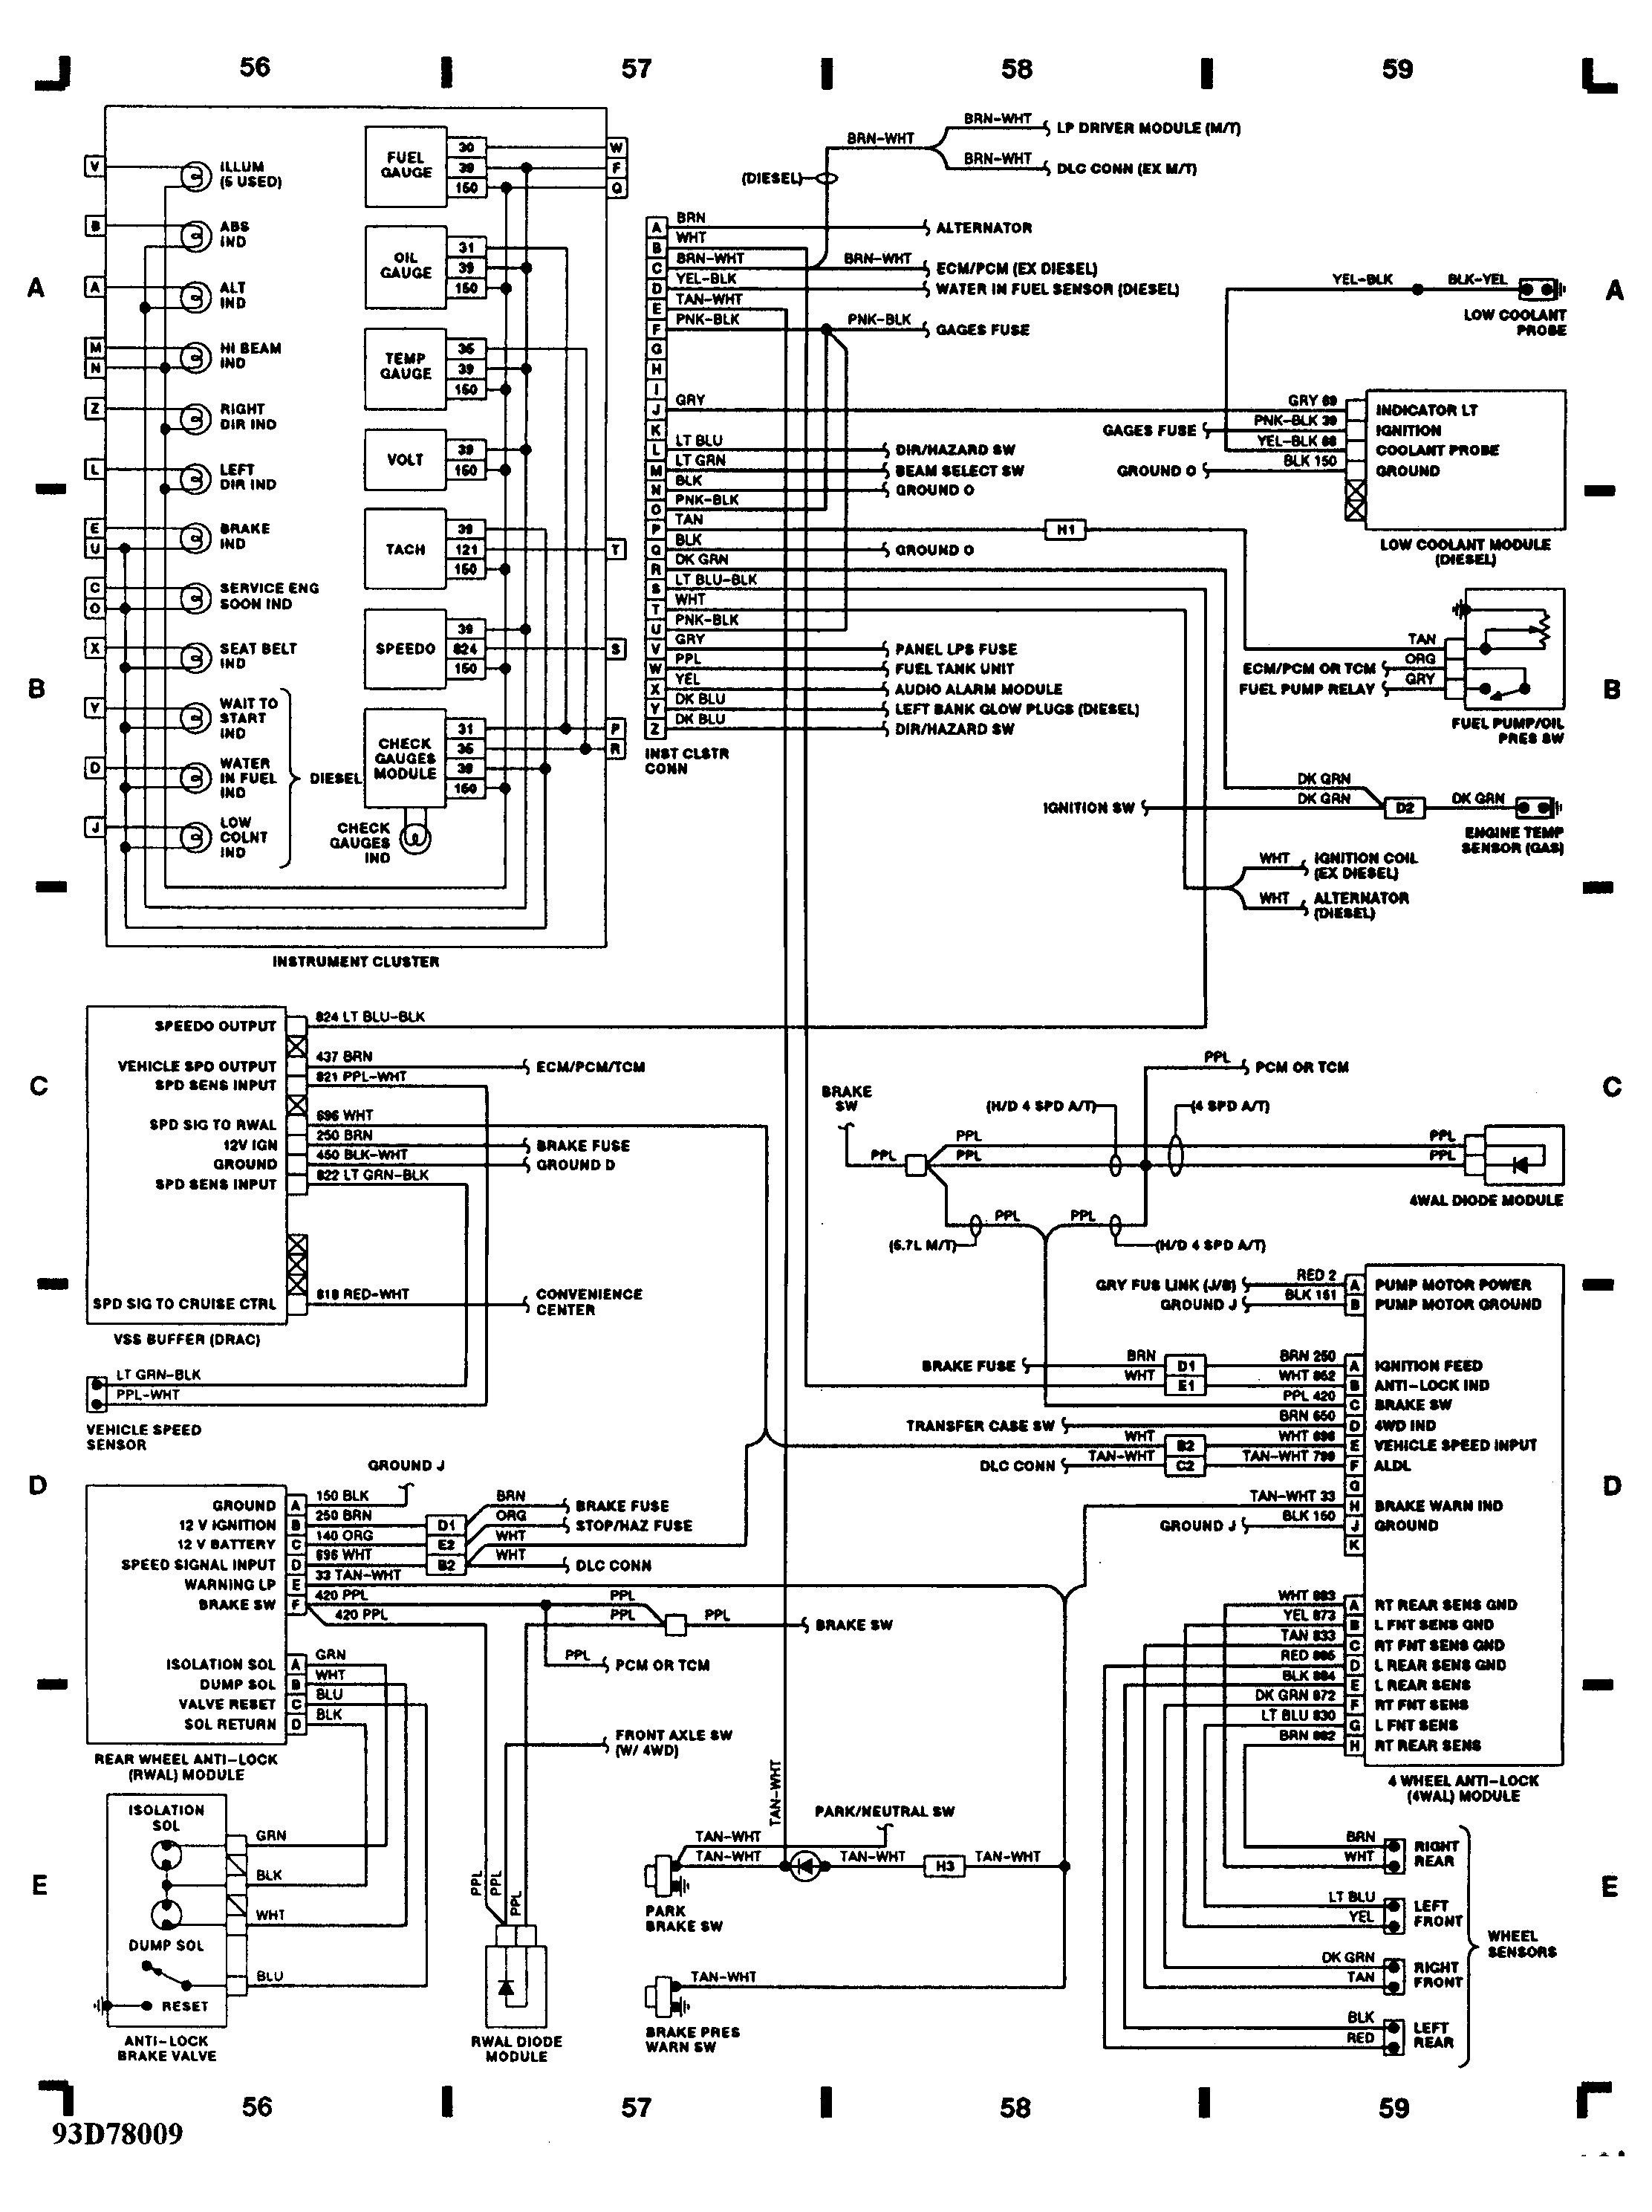 2002 Lincoln Ls Engine Diagram 2002 Ls1 Engine Diagram Another Blog About Wiring Diagram •